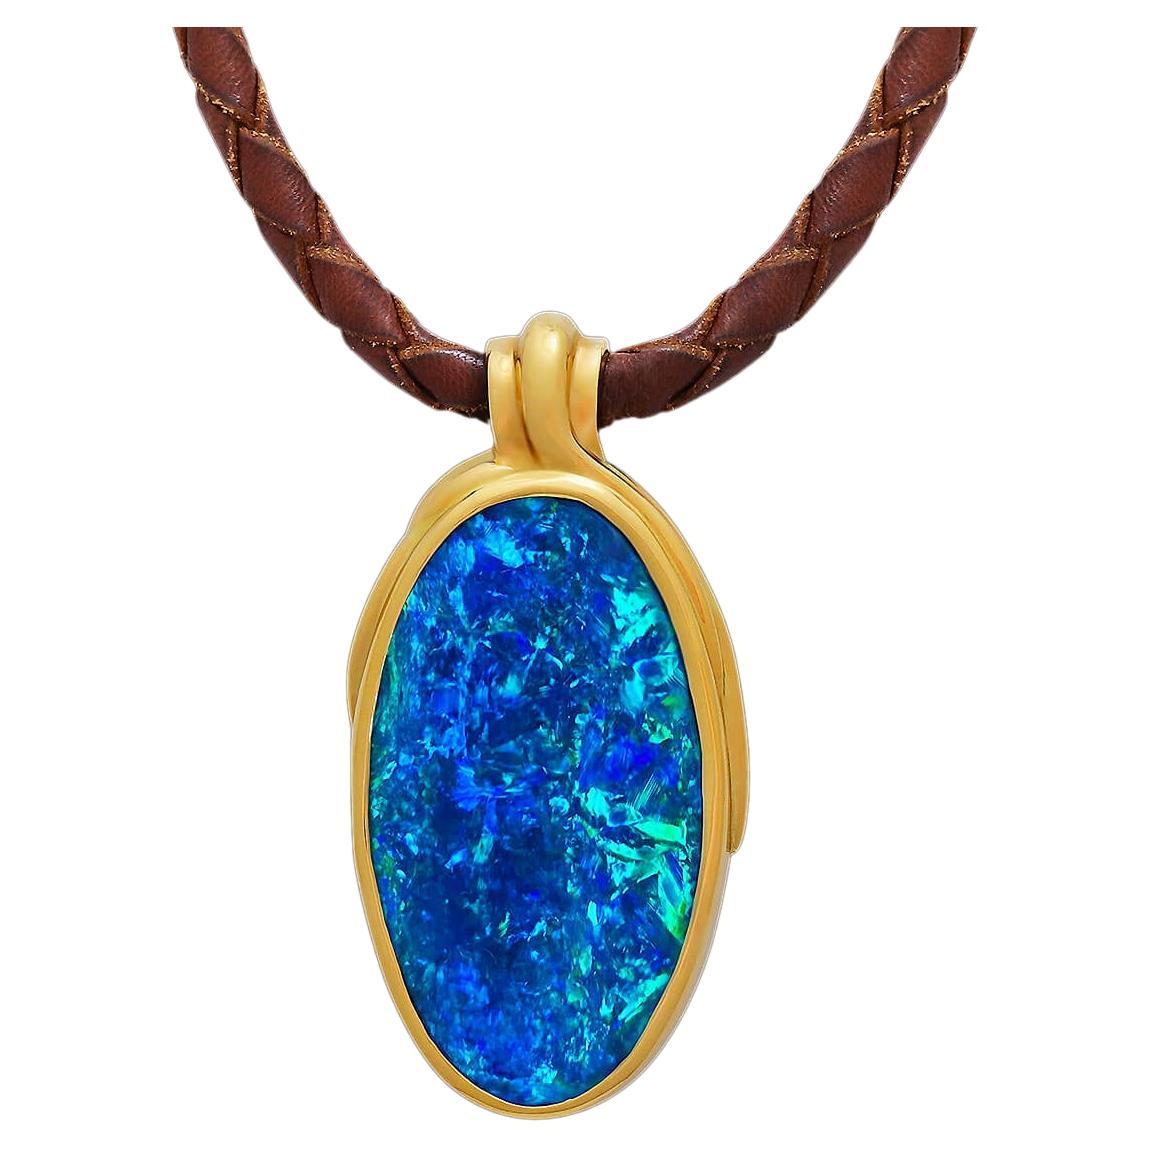 With the colours of a tropical sea, this breathtaking opal is an Australian boulder opal from outback Queensland. Surrounded by solid 18K gold, it is a true desert beauty; with over 60ct of a stunning gem-grade boulder, this is a once-in-a-lifetime